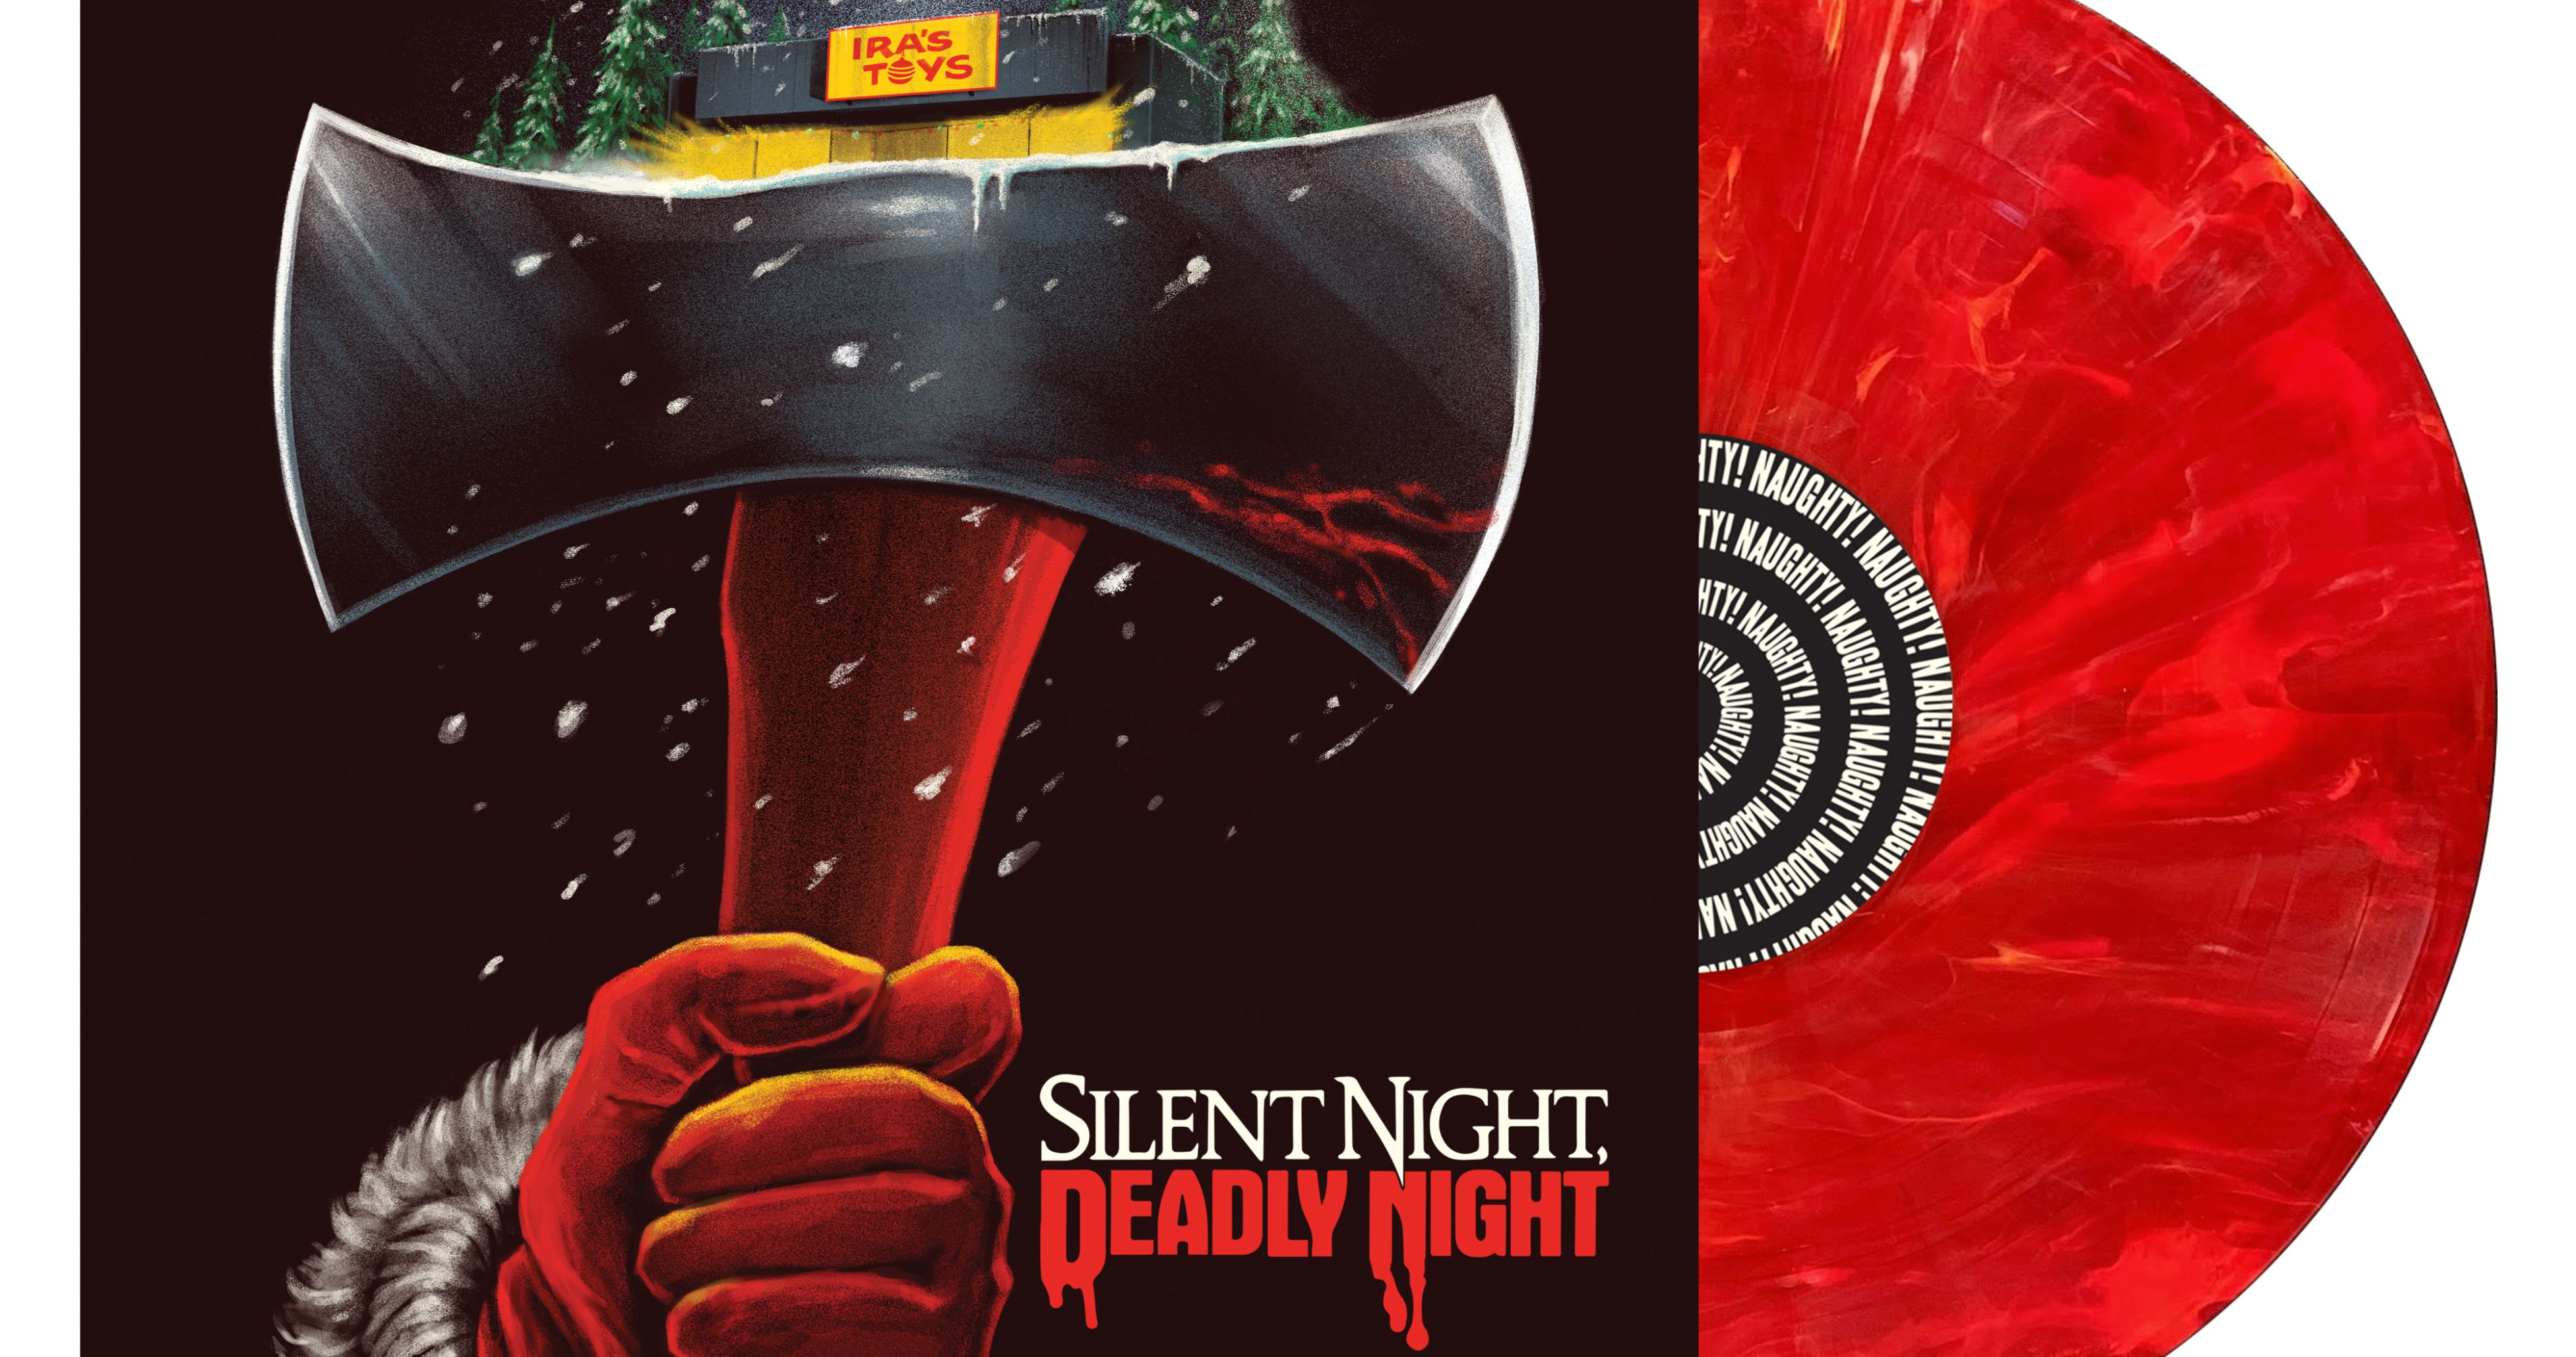 New Silent Night, Deadly Night Soundtrack Vinyl with 2 Unreleased Tracks Coming on Black Friday